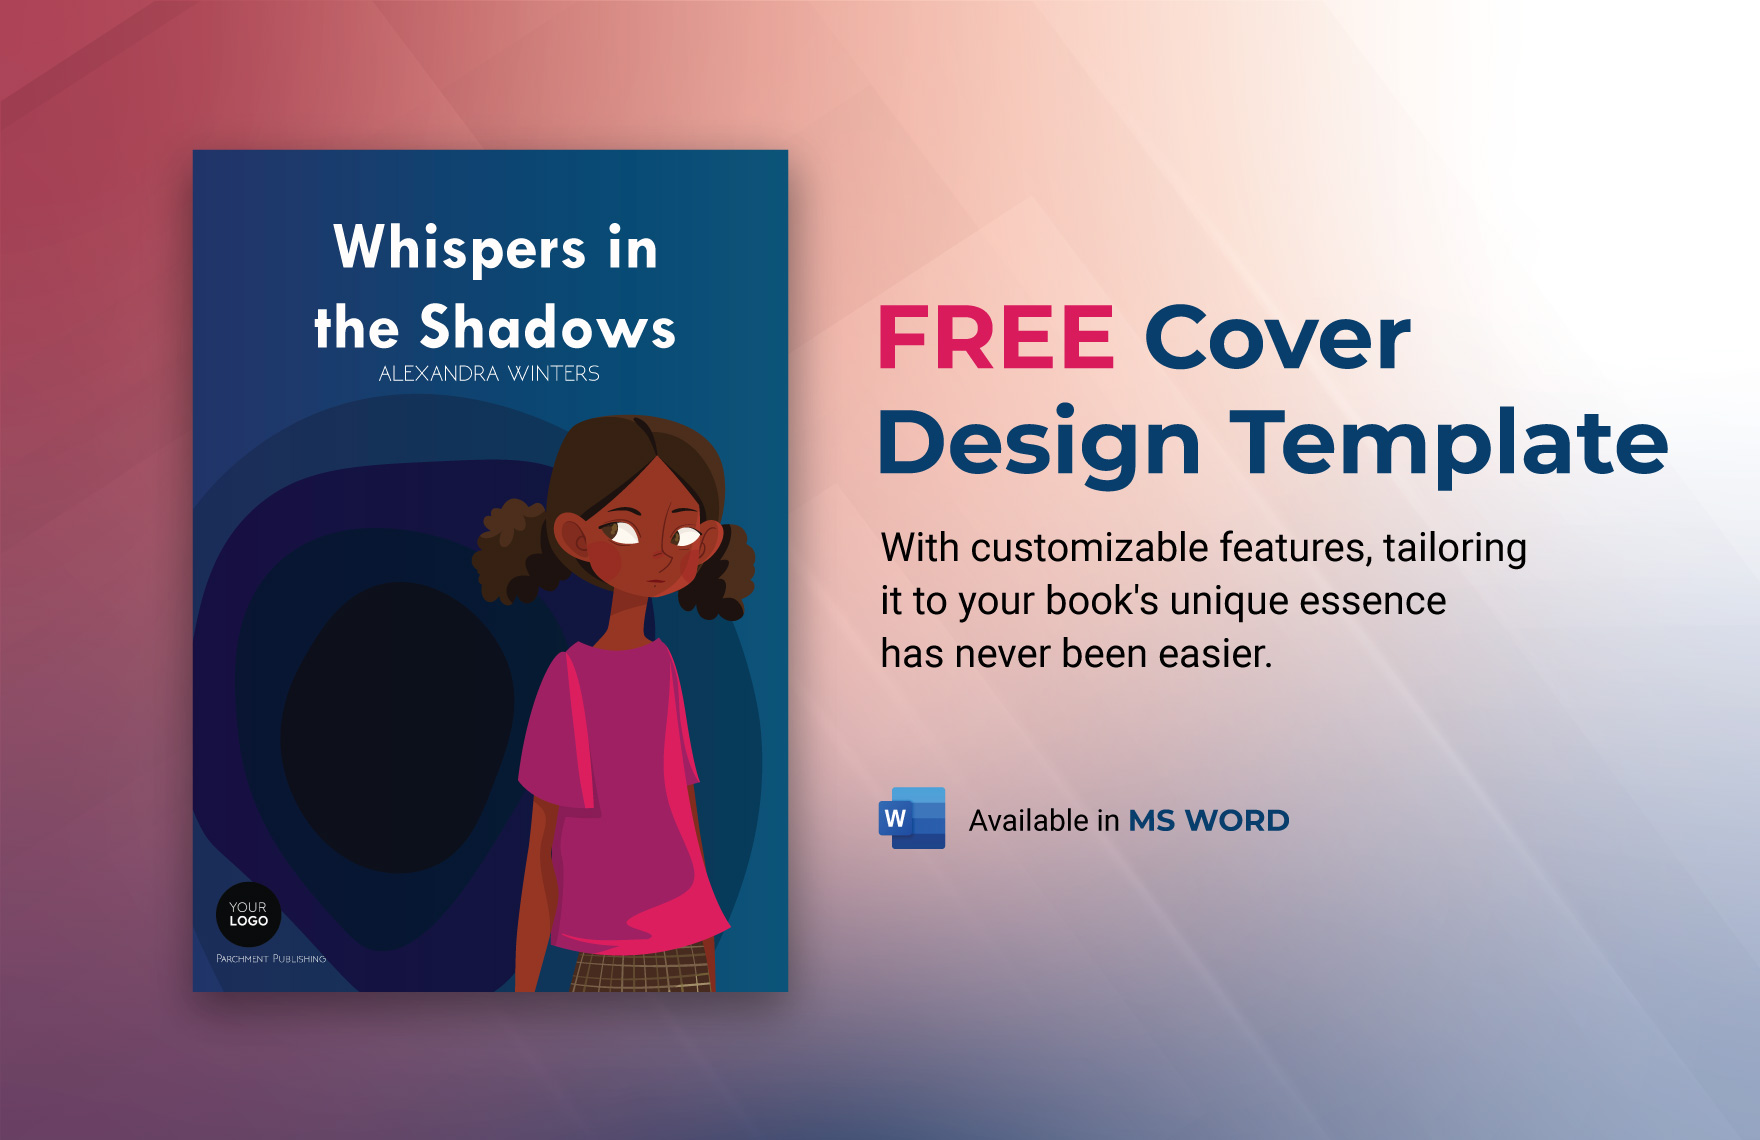 cover-ms-word-template-in-word-free-download-template